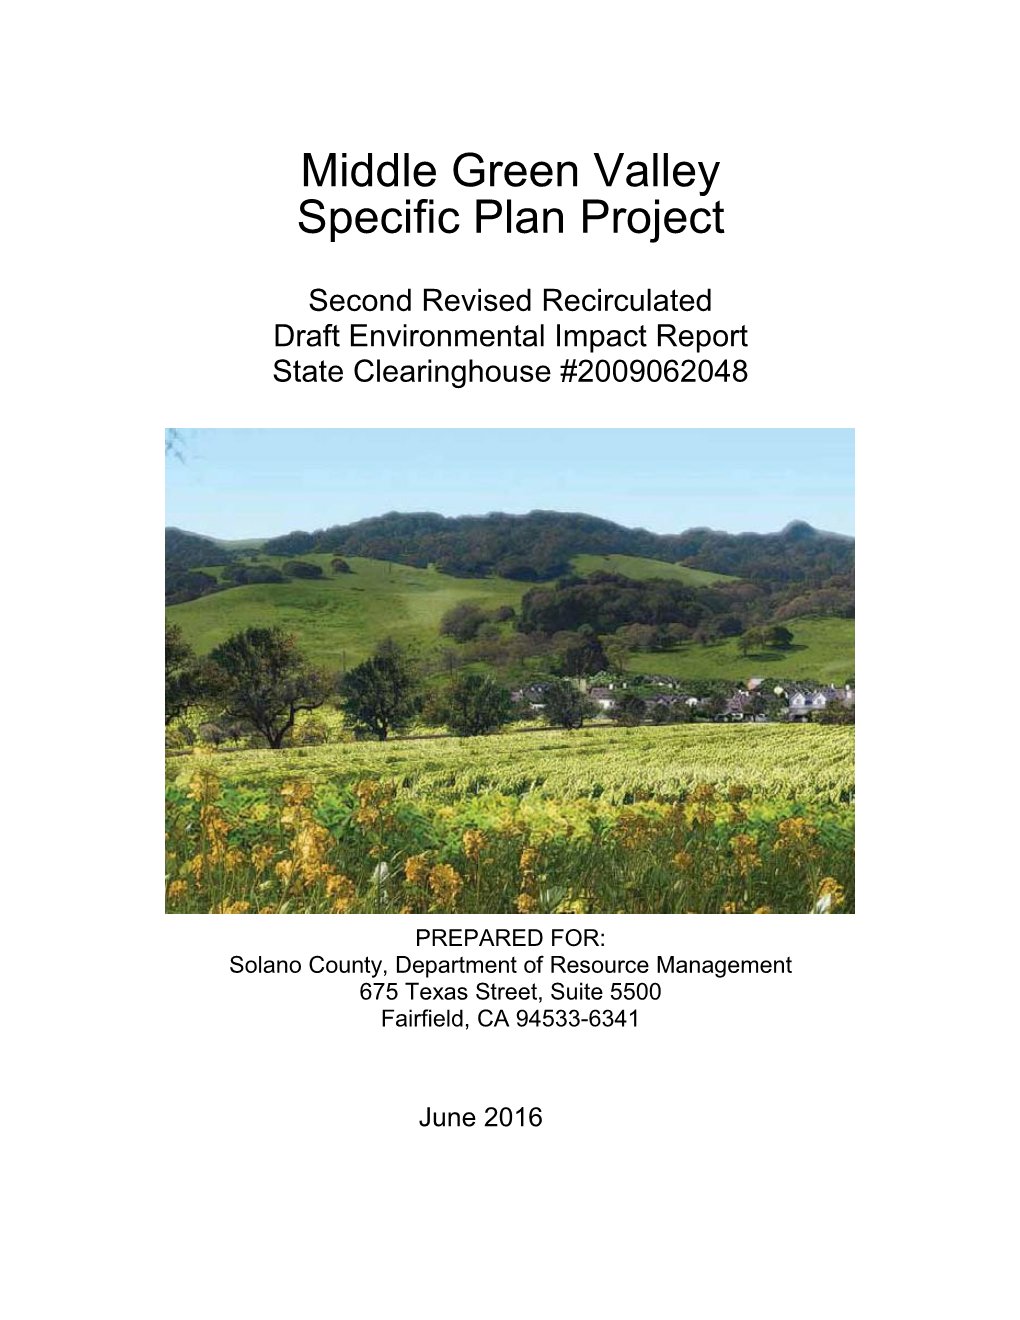 Middle Green Valley Specific Plan Project